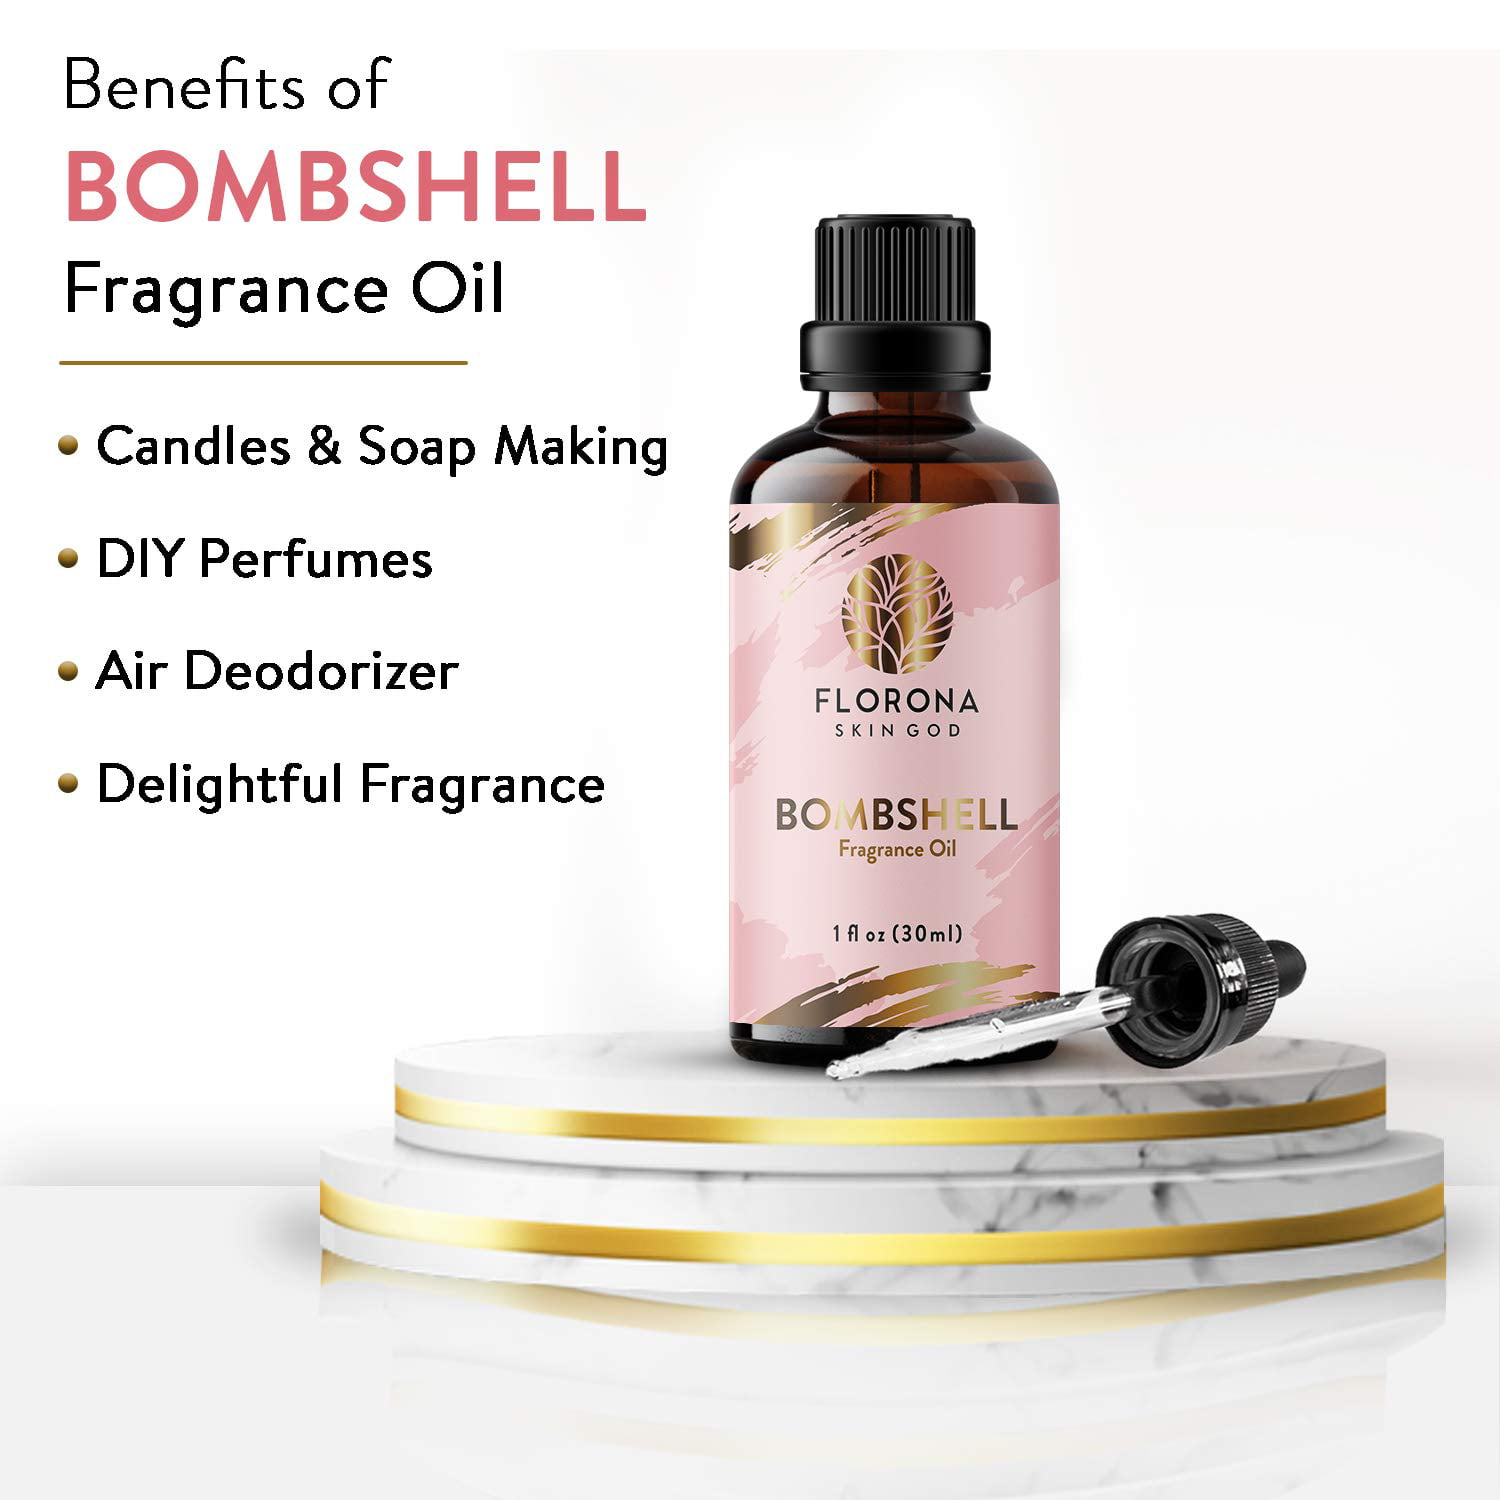  Bombshell Type Fragrance Oil - 16 oz. - For Candle